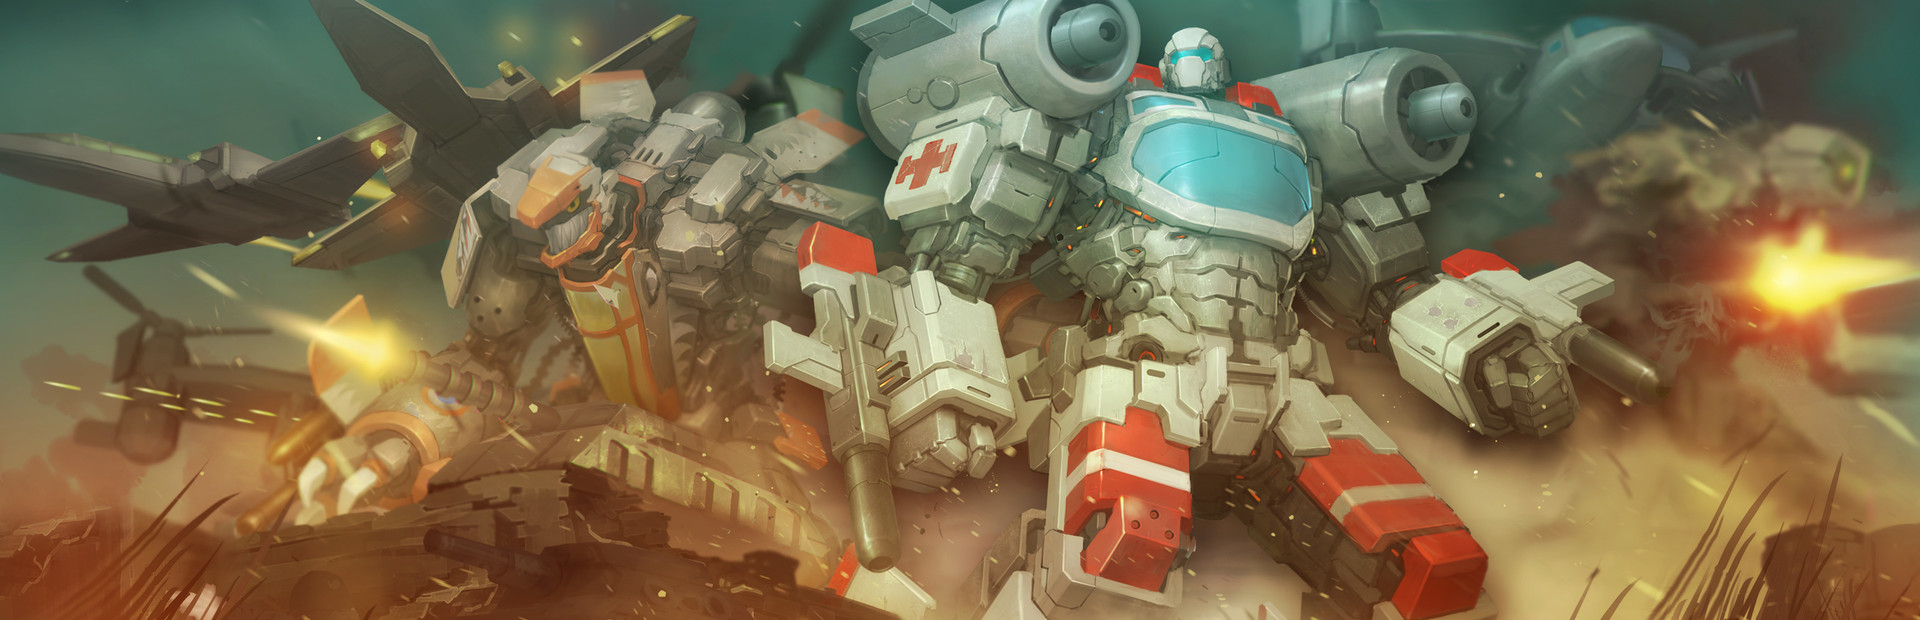 AirMech Wastelands cover image